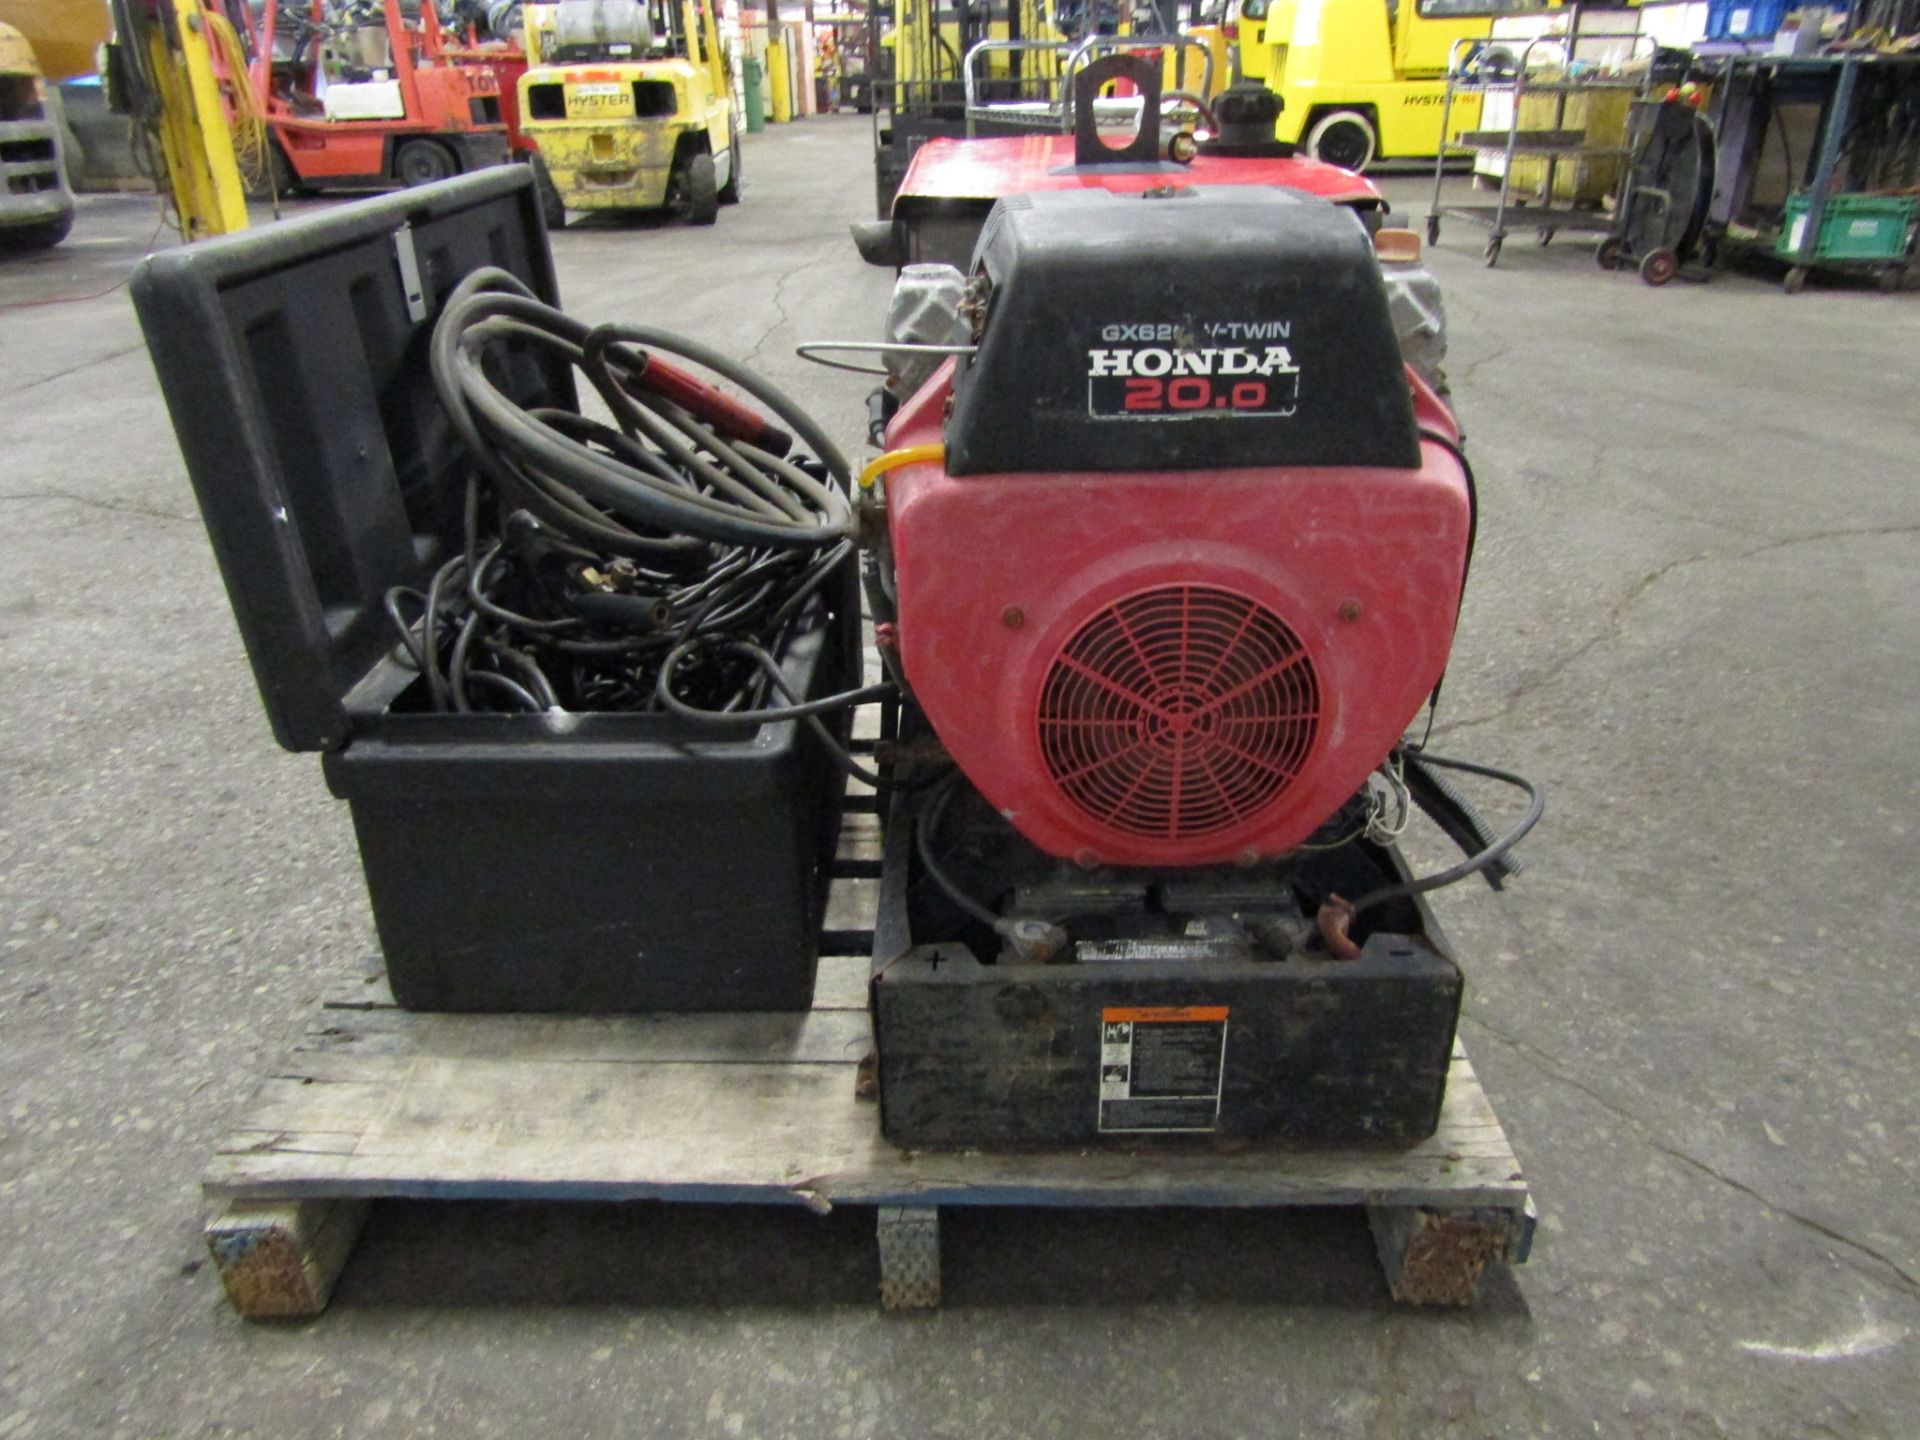 Lincoln Ranger 8 Gas Welder 20HP unit with HONDA MOTOR Stick Welder with 100 feet of wire - Image 3 of 3